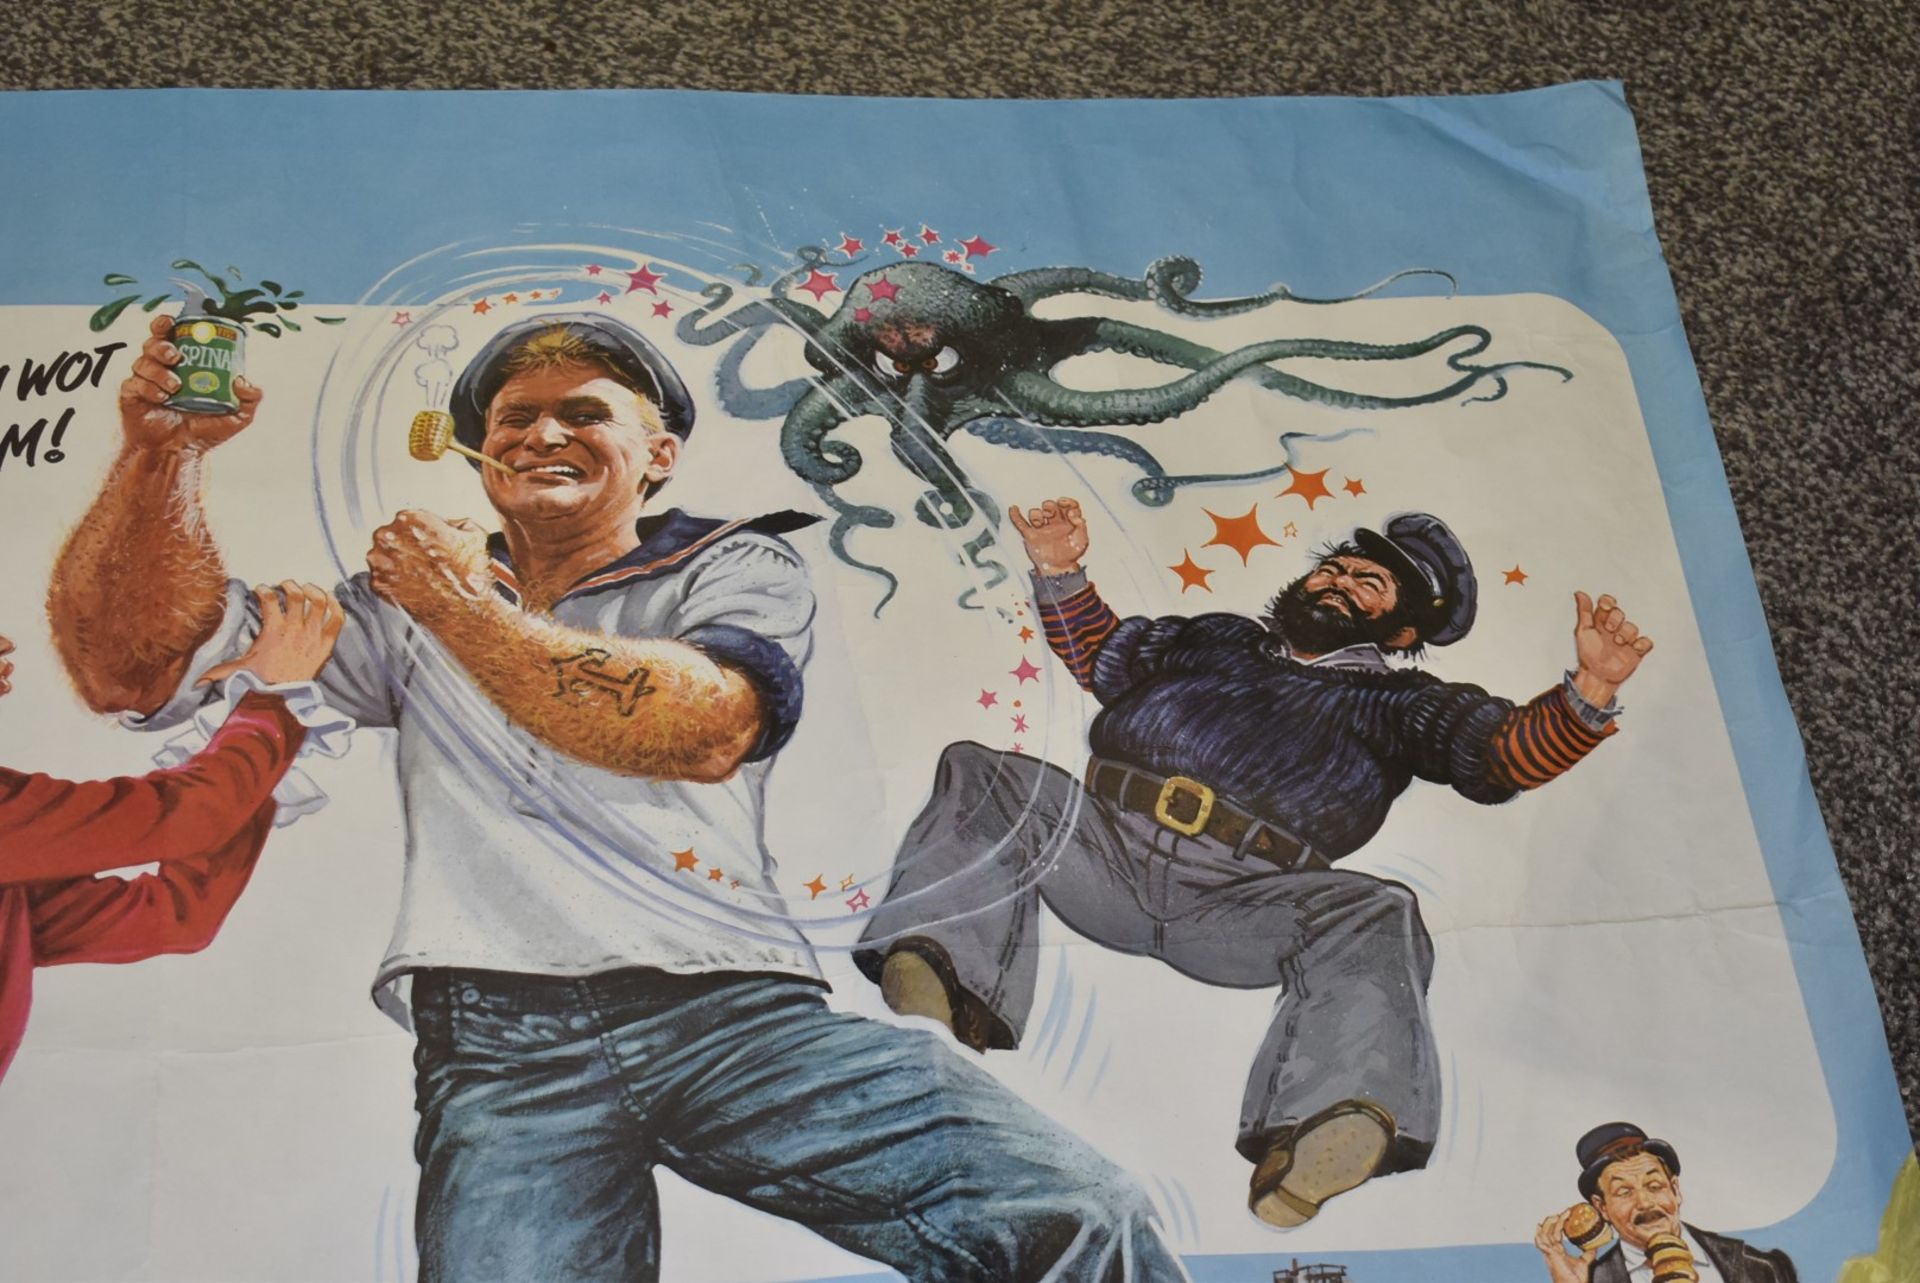 1 x Quad Movie Poster - POPEYE - Starring Robin Williams and Shelley Duvall - 1980 Film - Walt - Image 3 of 8